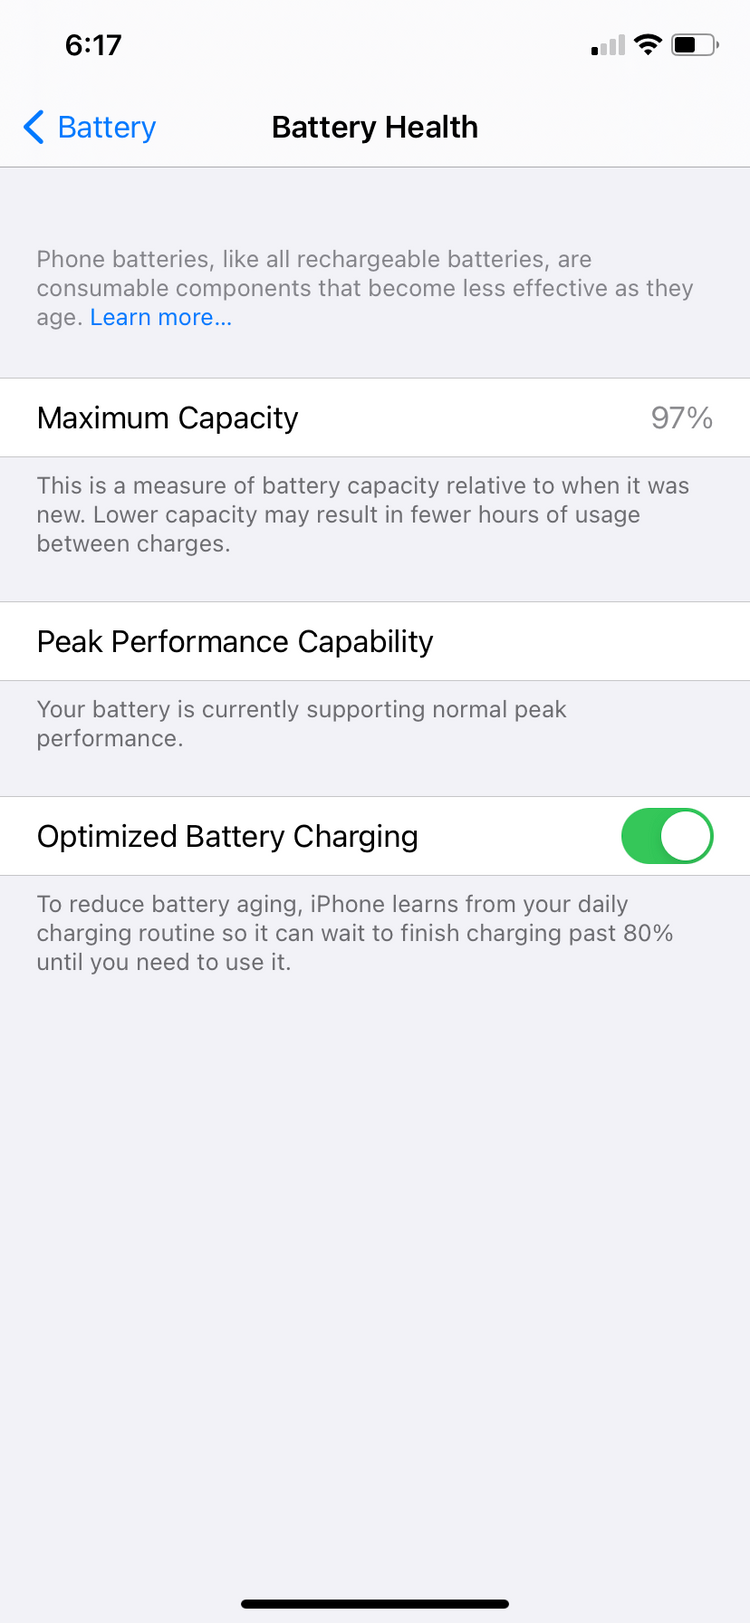 Battery-Health-settings-iPhone.png?q=50&fit=crop&w=750&dpr=1.5